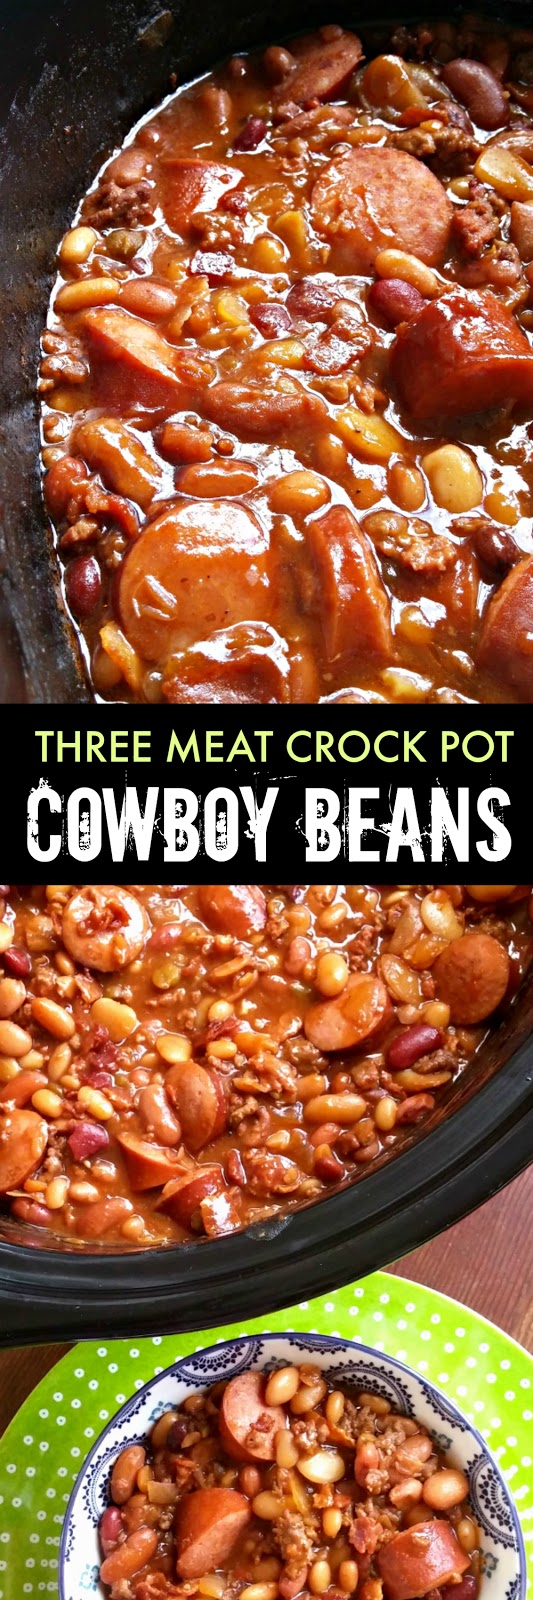 Three Meat Crock Pot Cowboy Beans | BBQ beans with smoked sausage, bacon and ground beef!